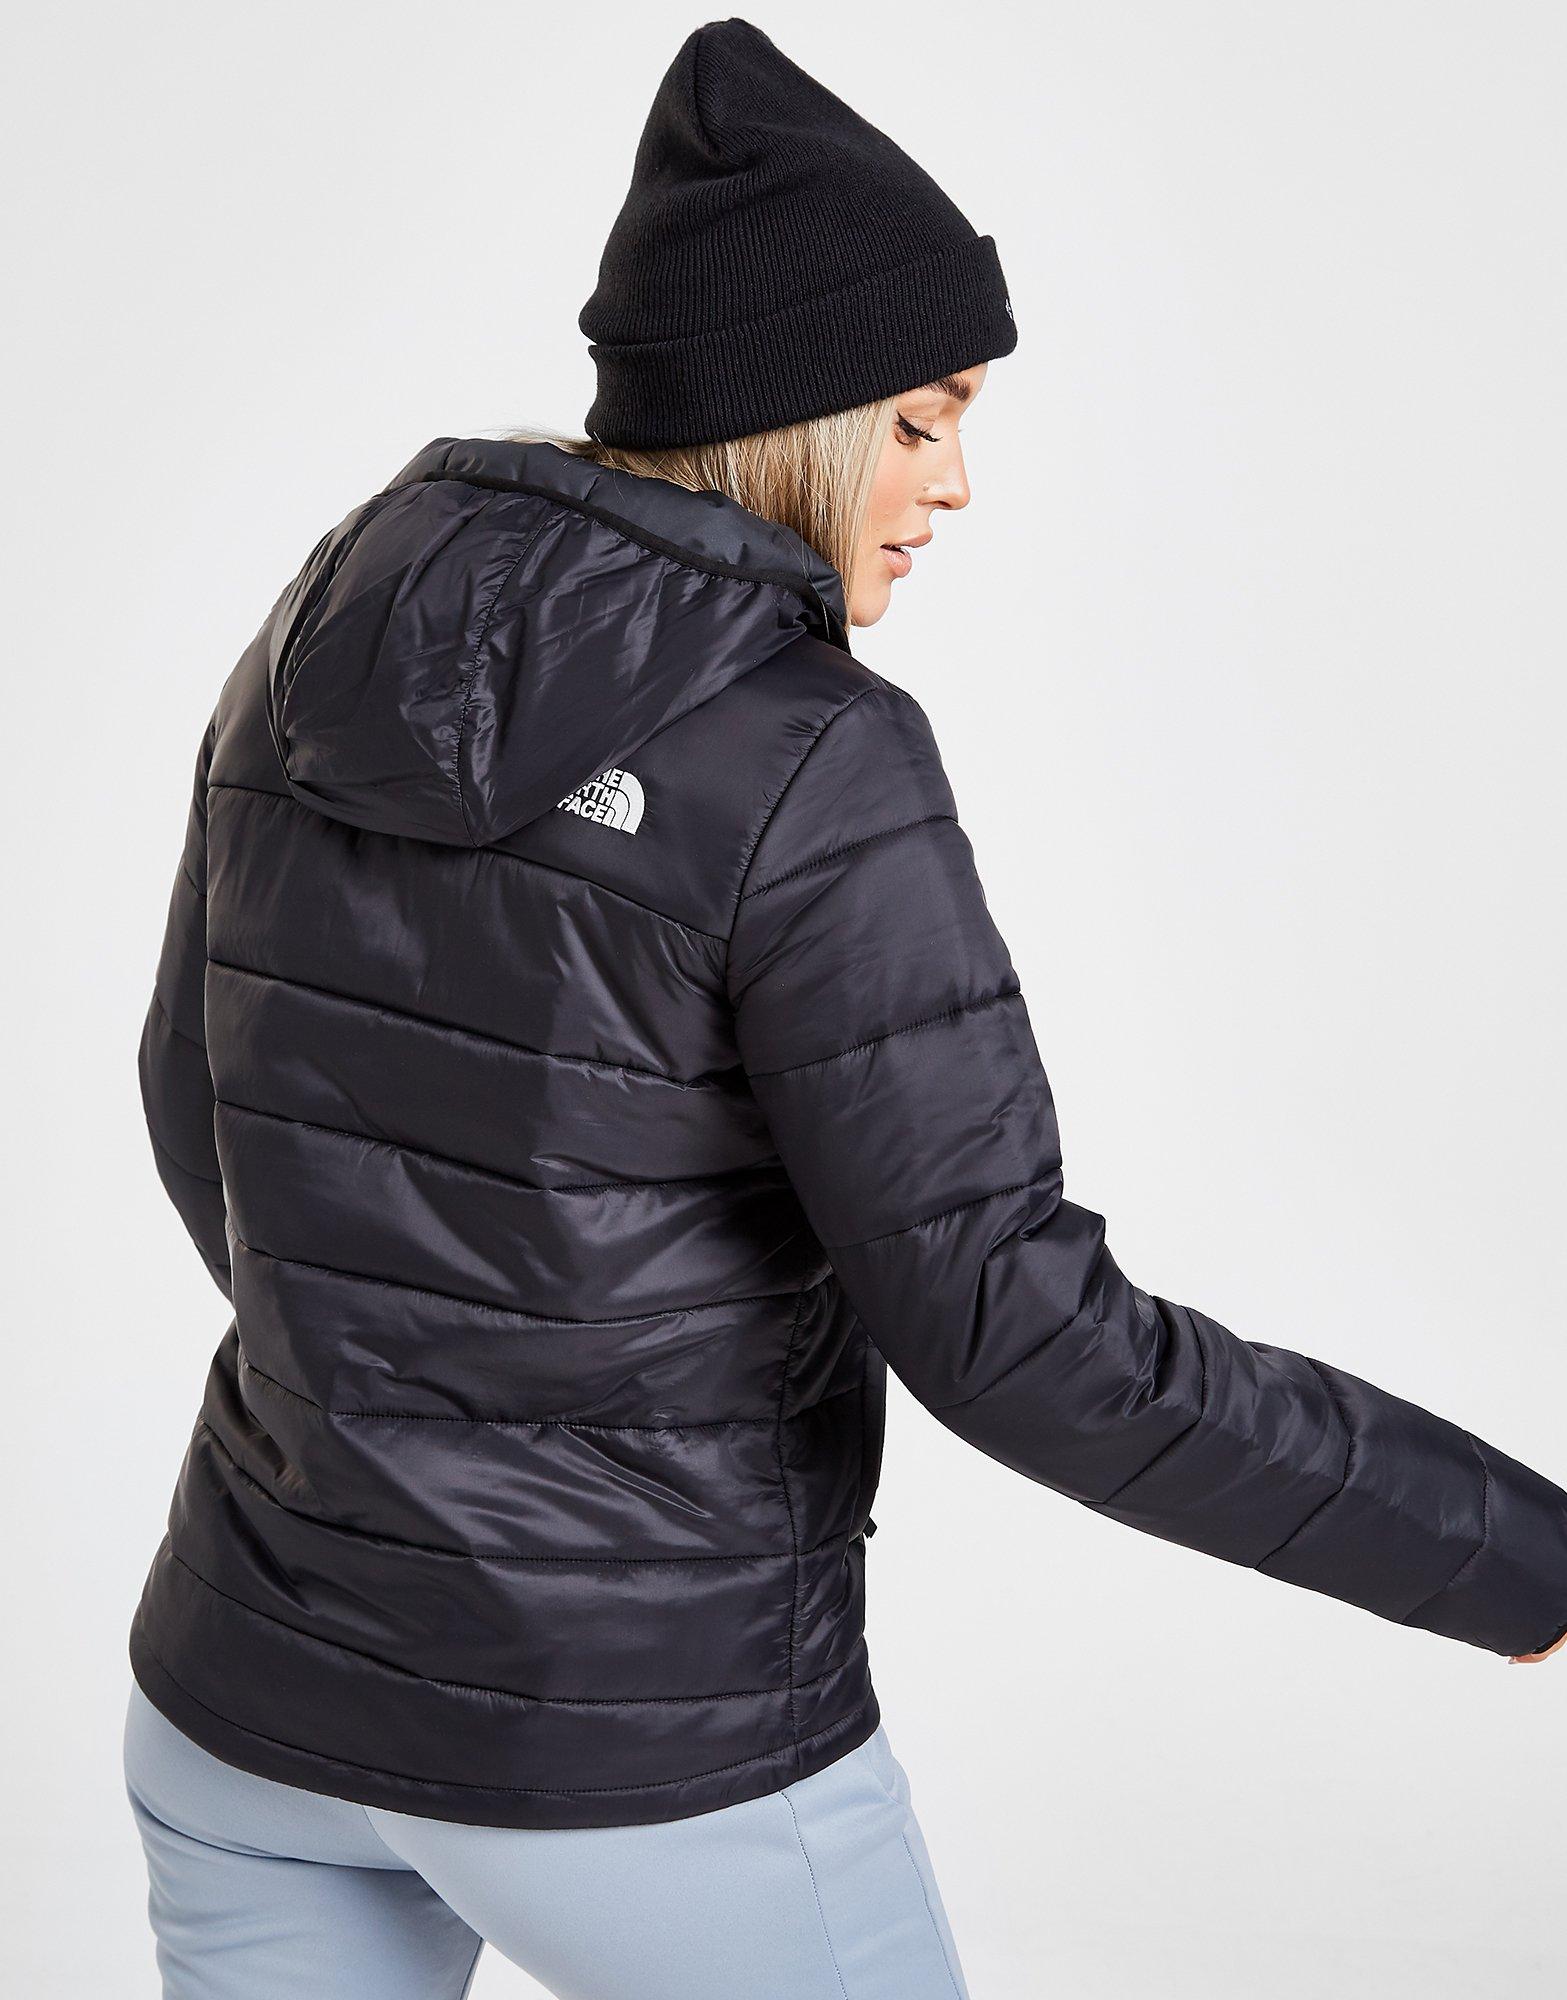 the north face padding